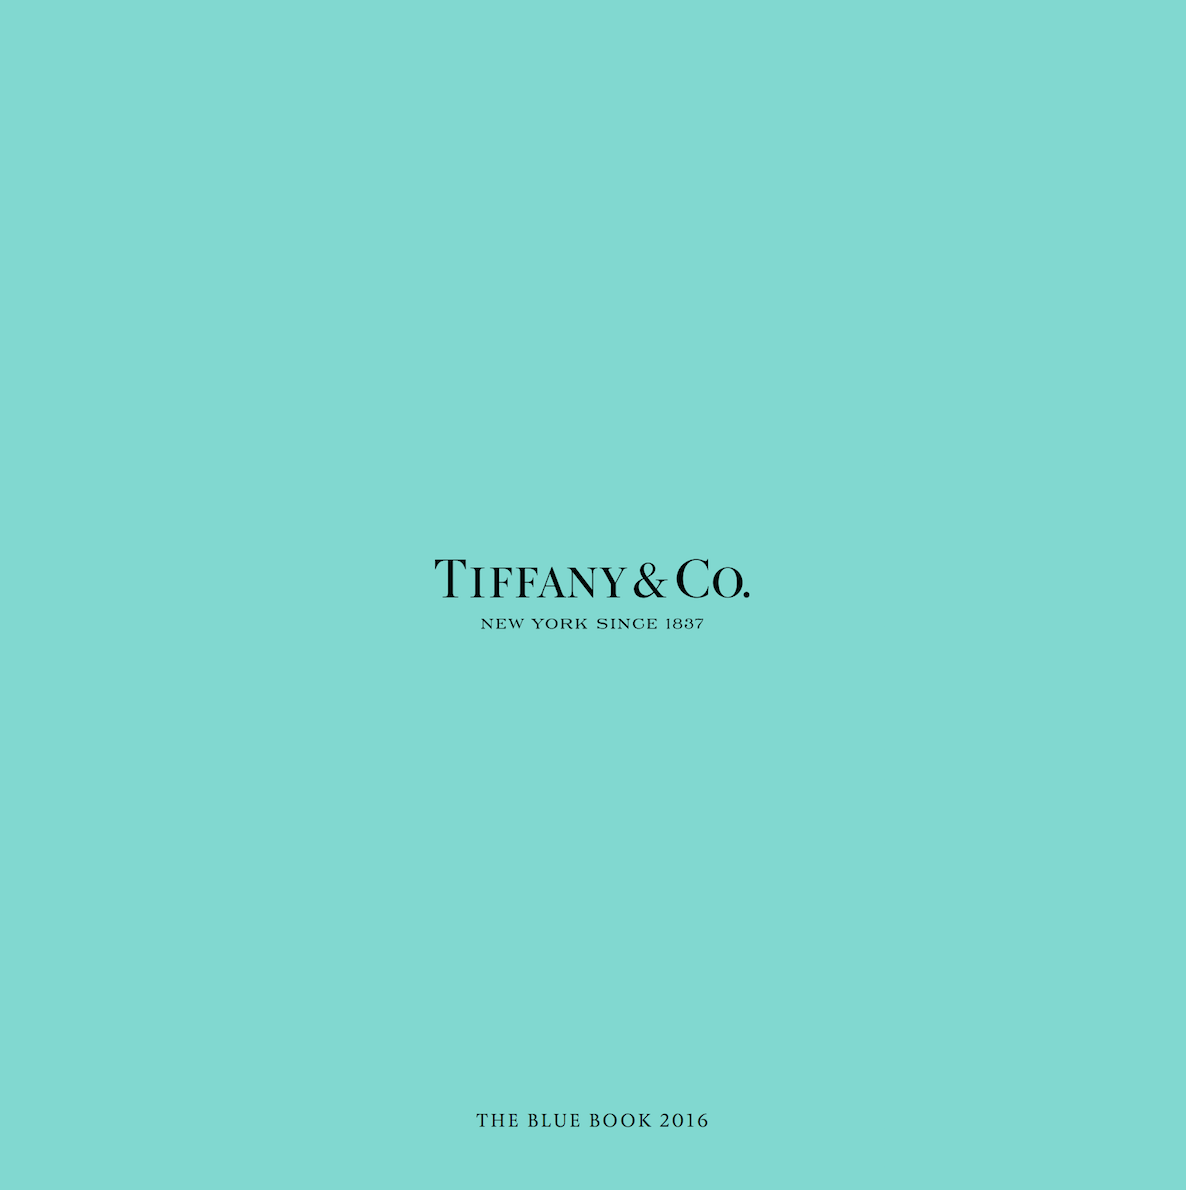 Tiffany & Co Jewelry: The History Behind the Name